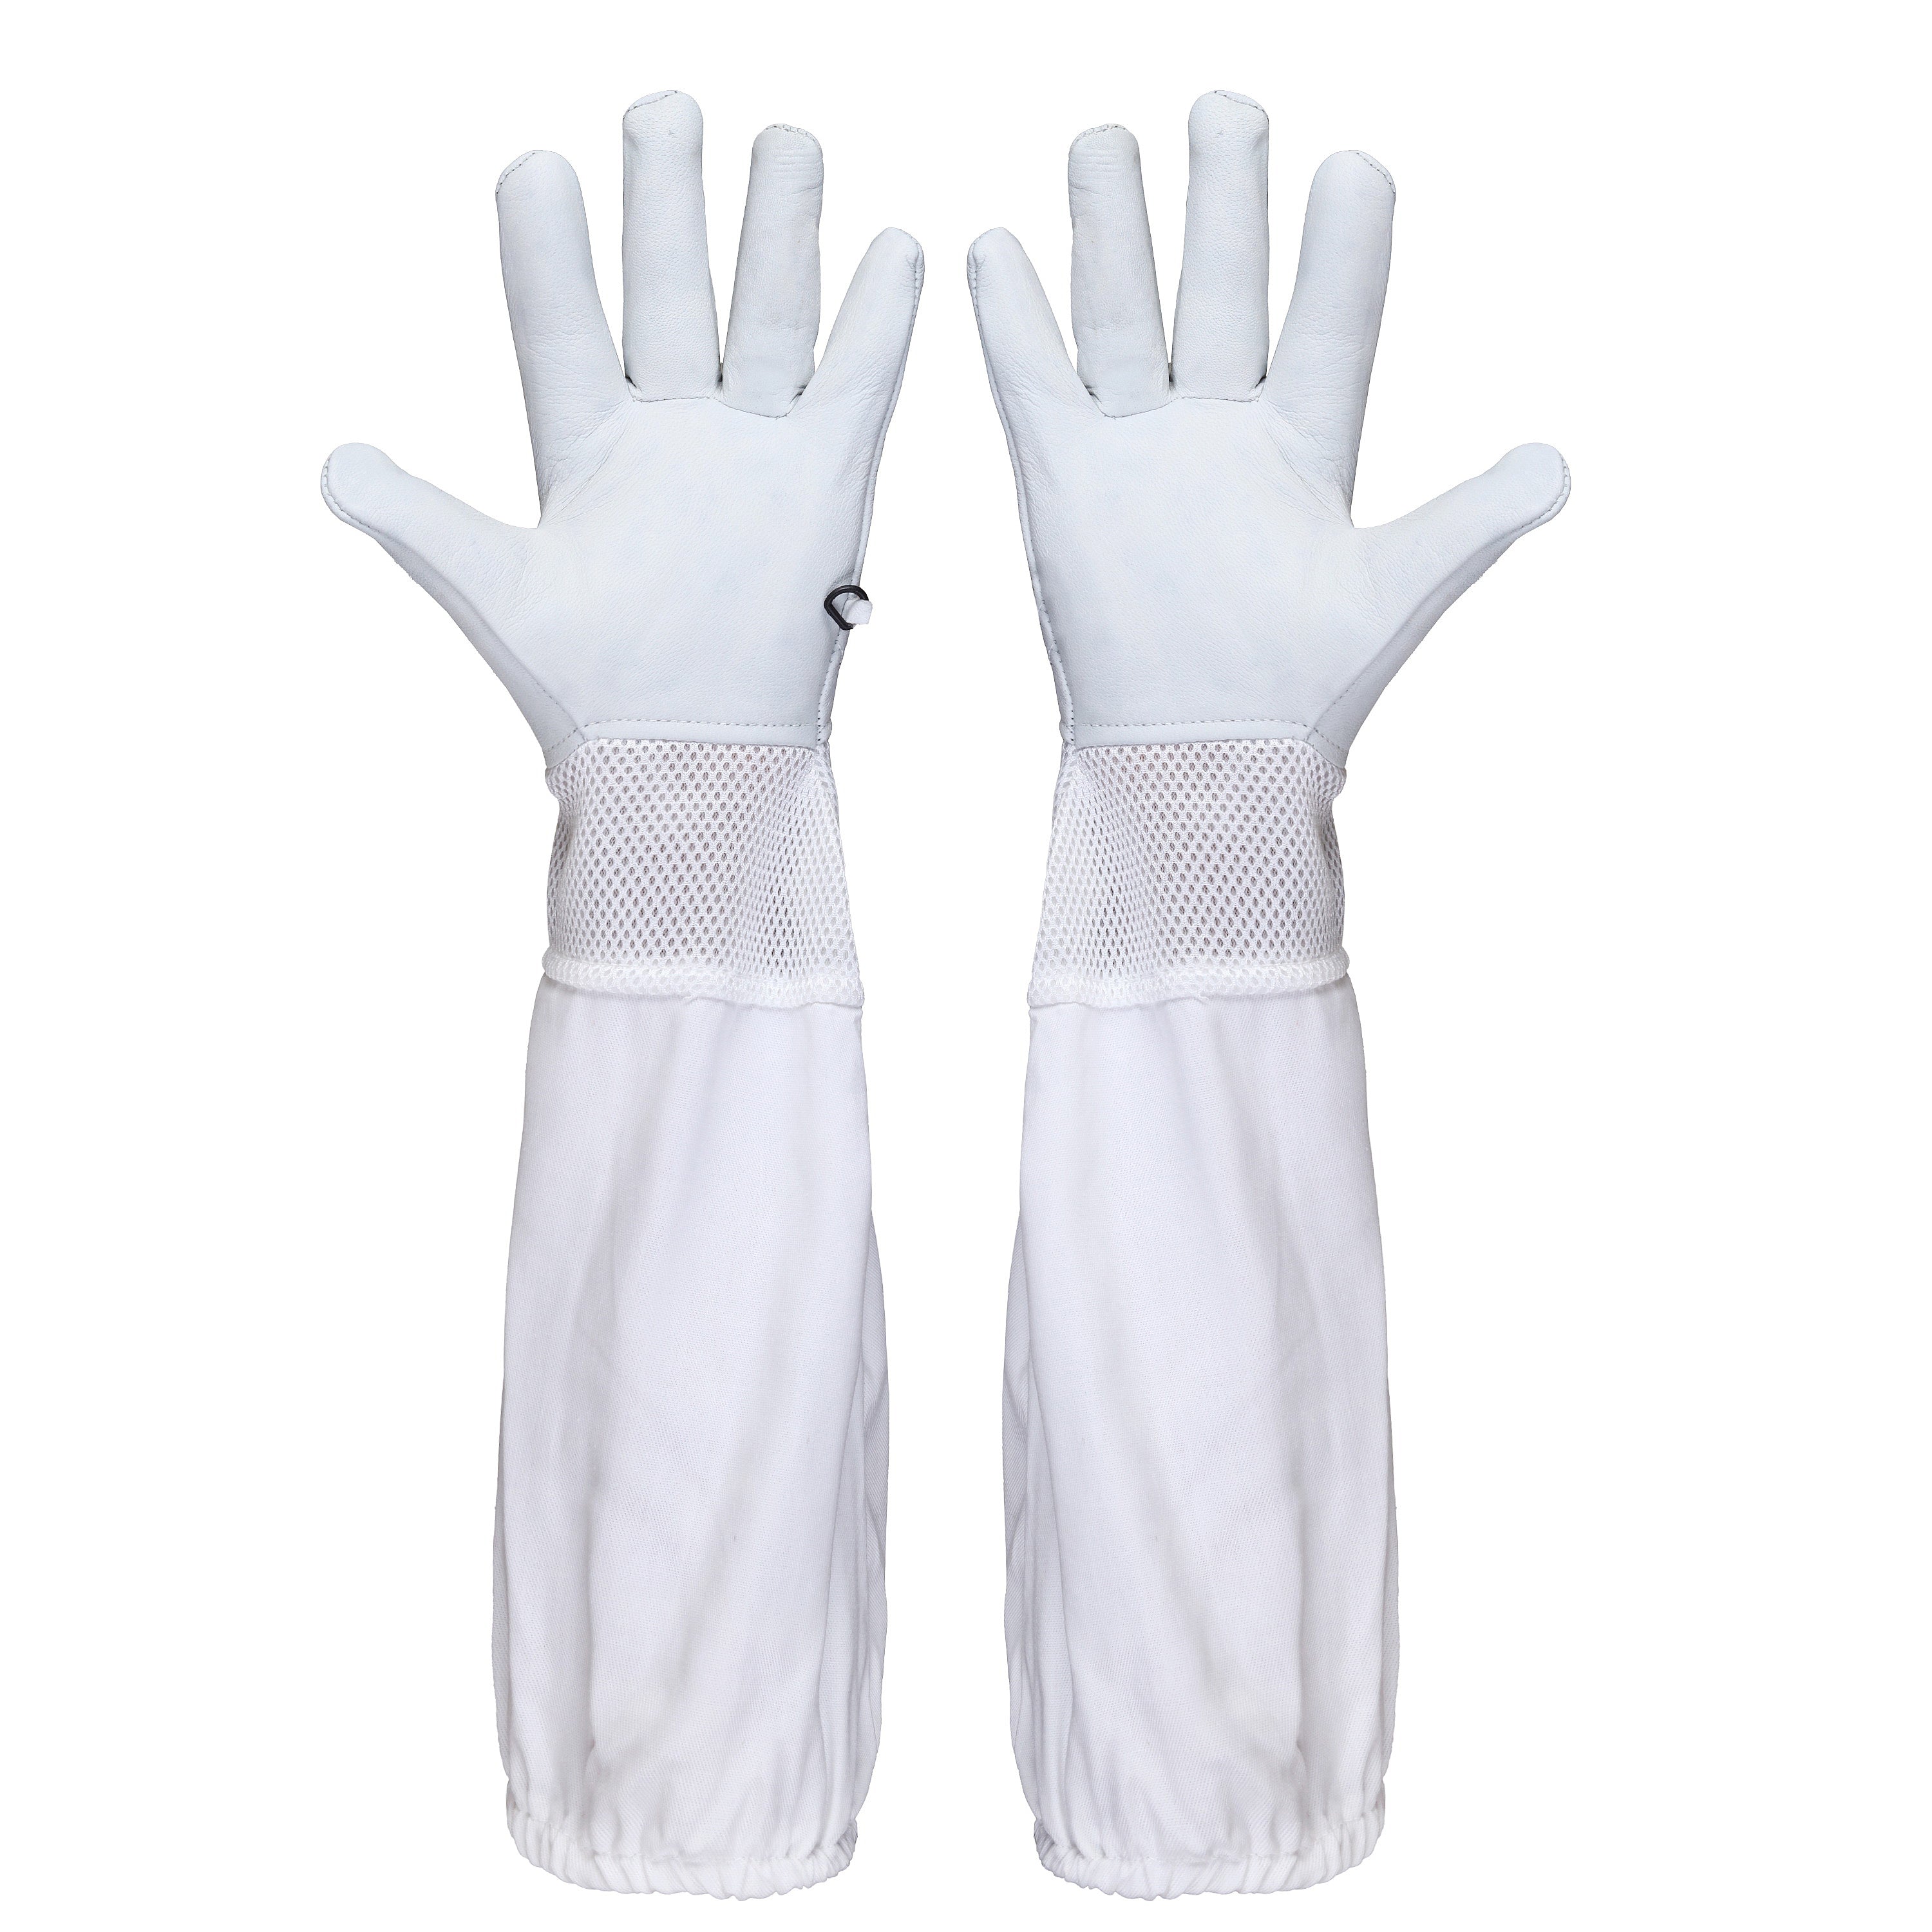 Goatskin Beekeeping Gloves with Ventilated Cuffs